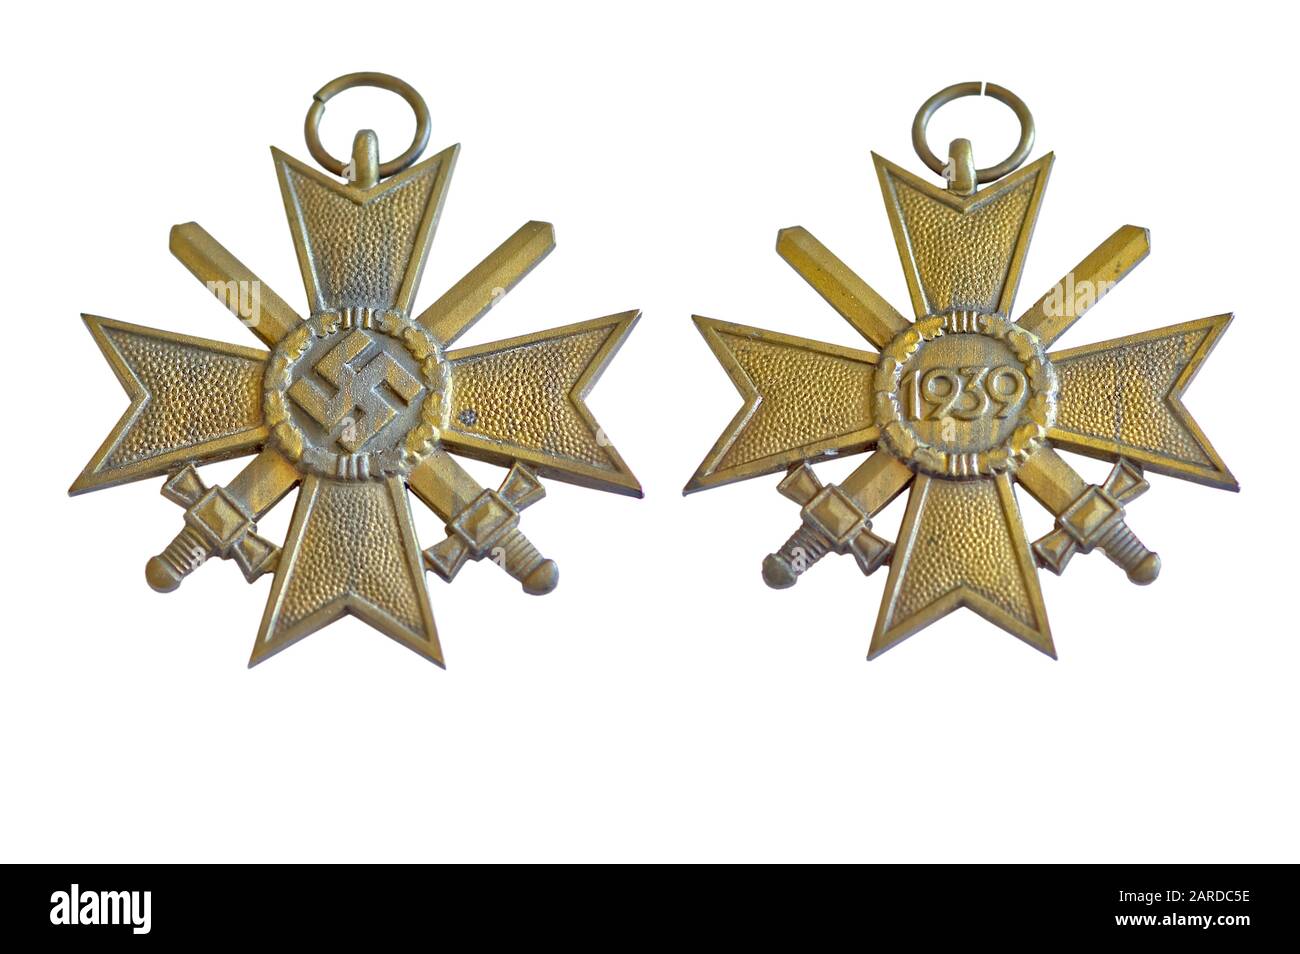 An old World War 2 Nazi Merit Medallion, circa 1939. Isolated on white background with both sides shown in one composite image. My brother acquired th Stock Photo